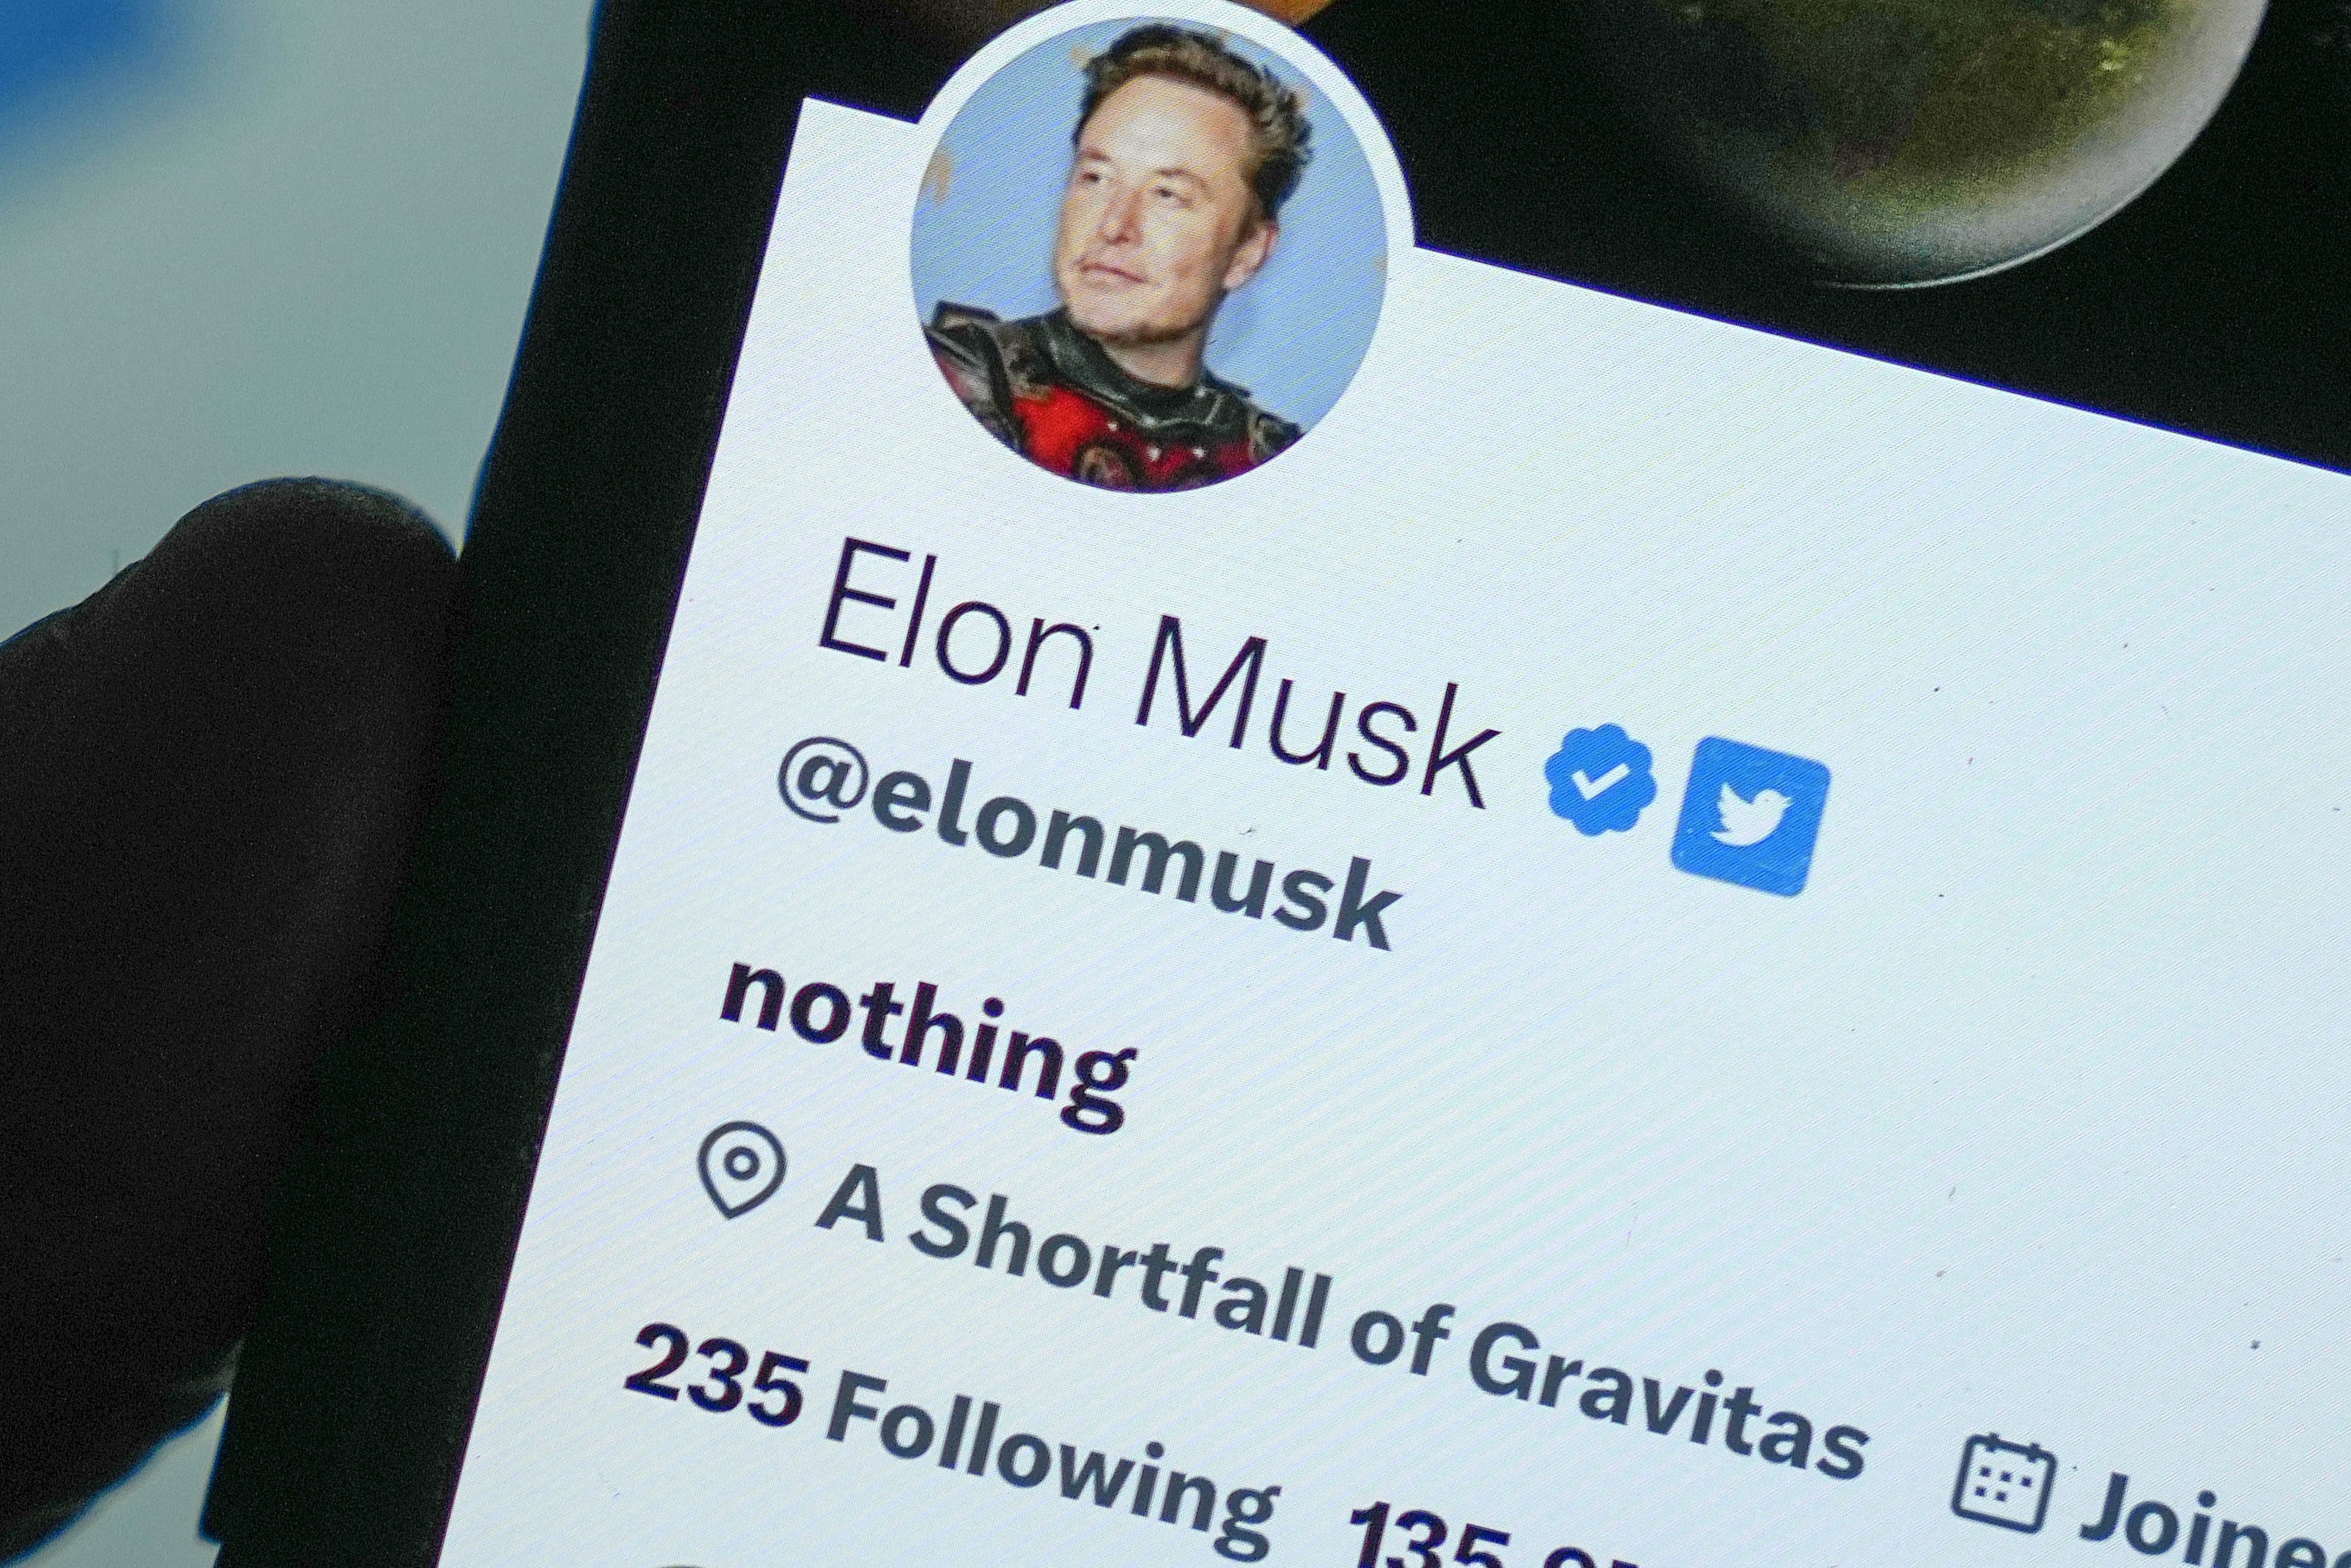 The Twitter (now X) account of Elon Musk is seen on a smartphone on 21 April, 2023 in Knutsford, UK